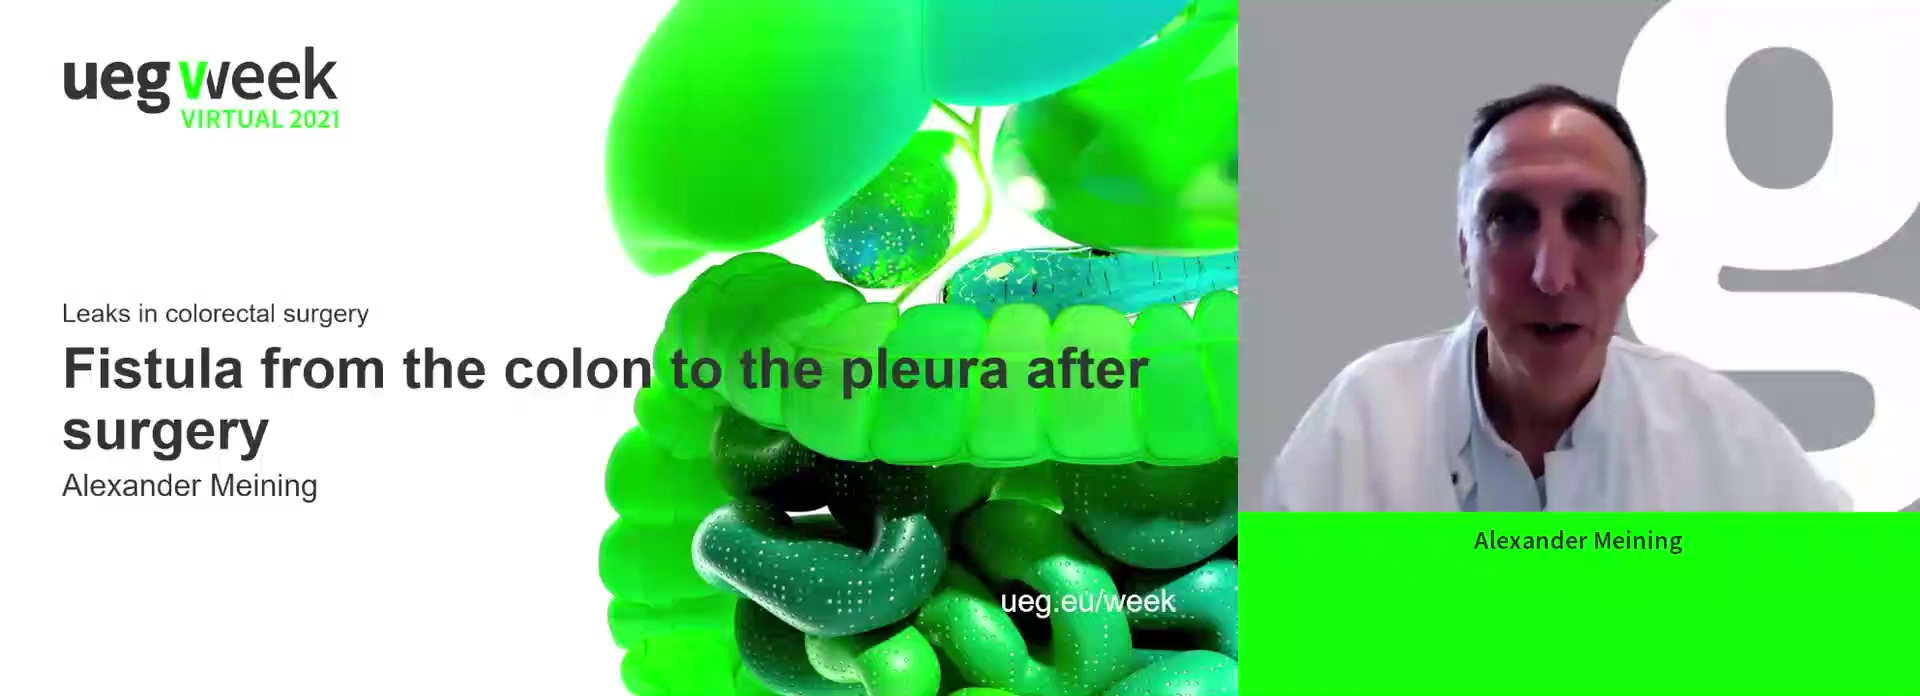 Fistula from the colon to the pleura after surgery